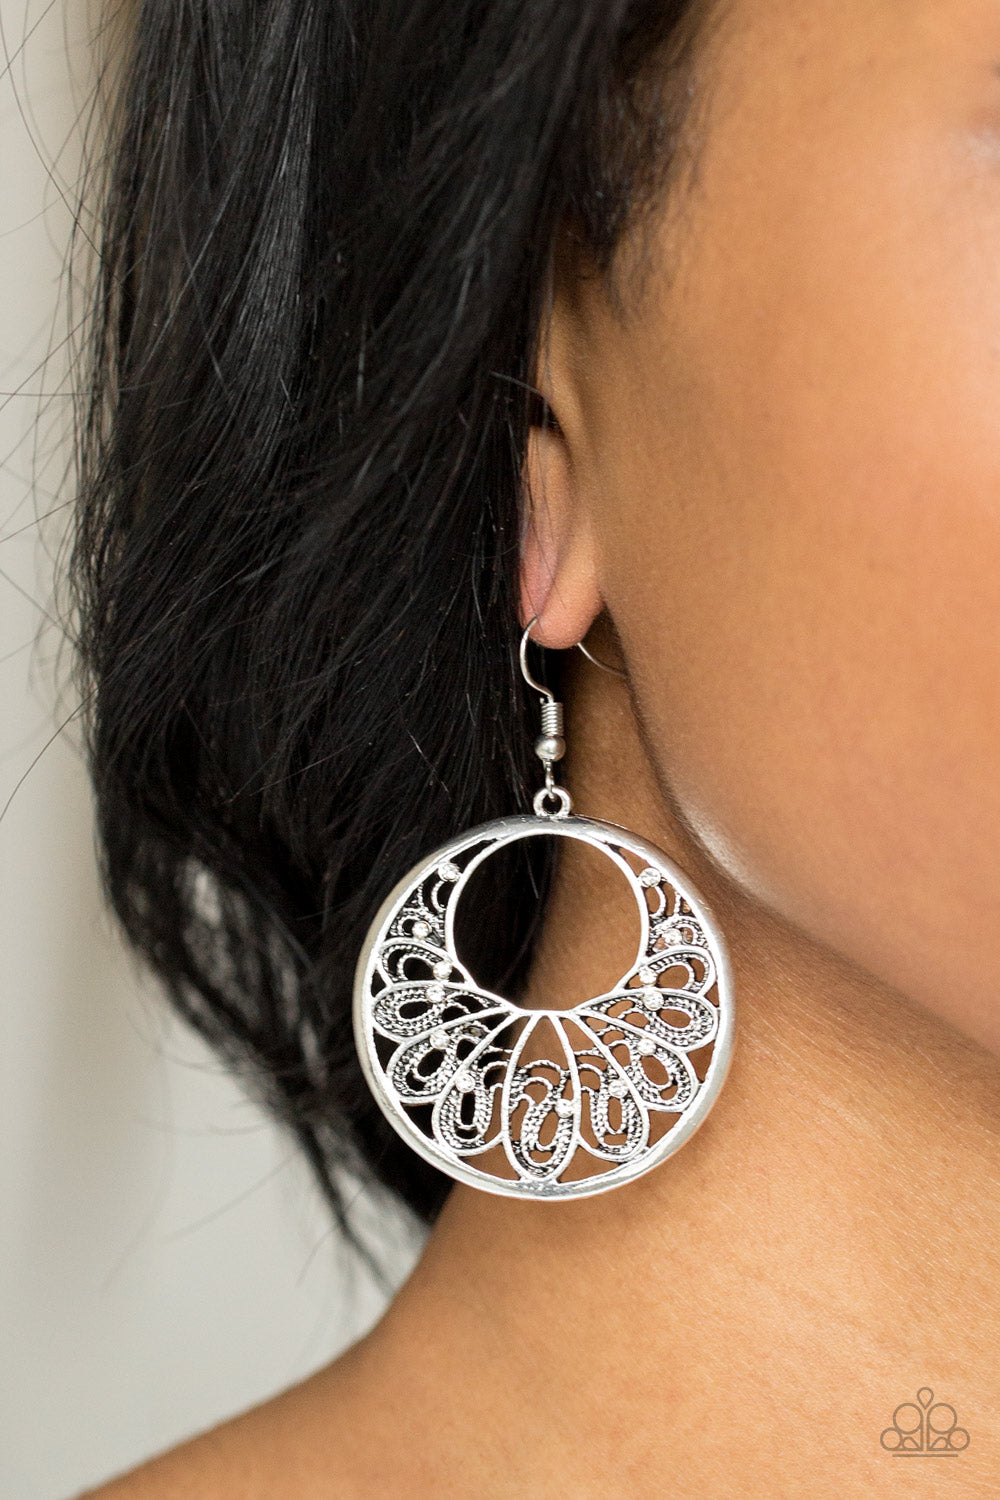 Fancy That- White and Silver Earrings- Paparazzi Accessories